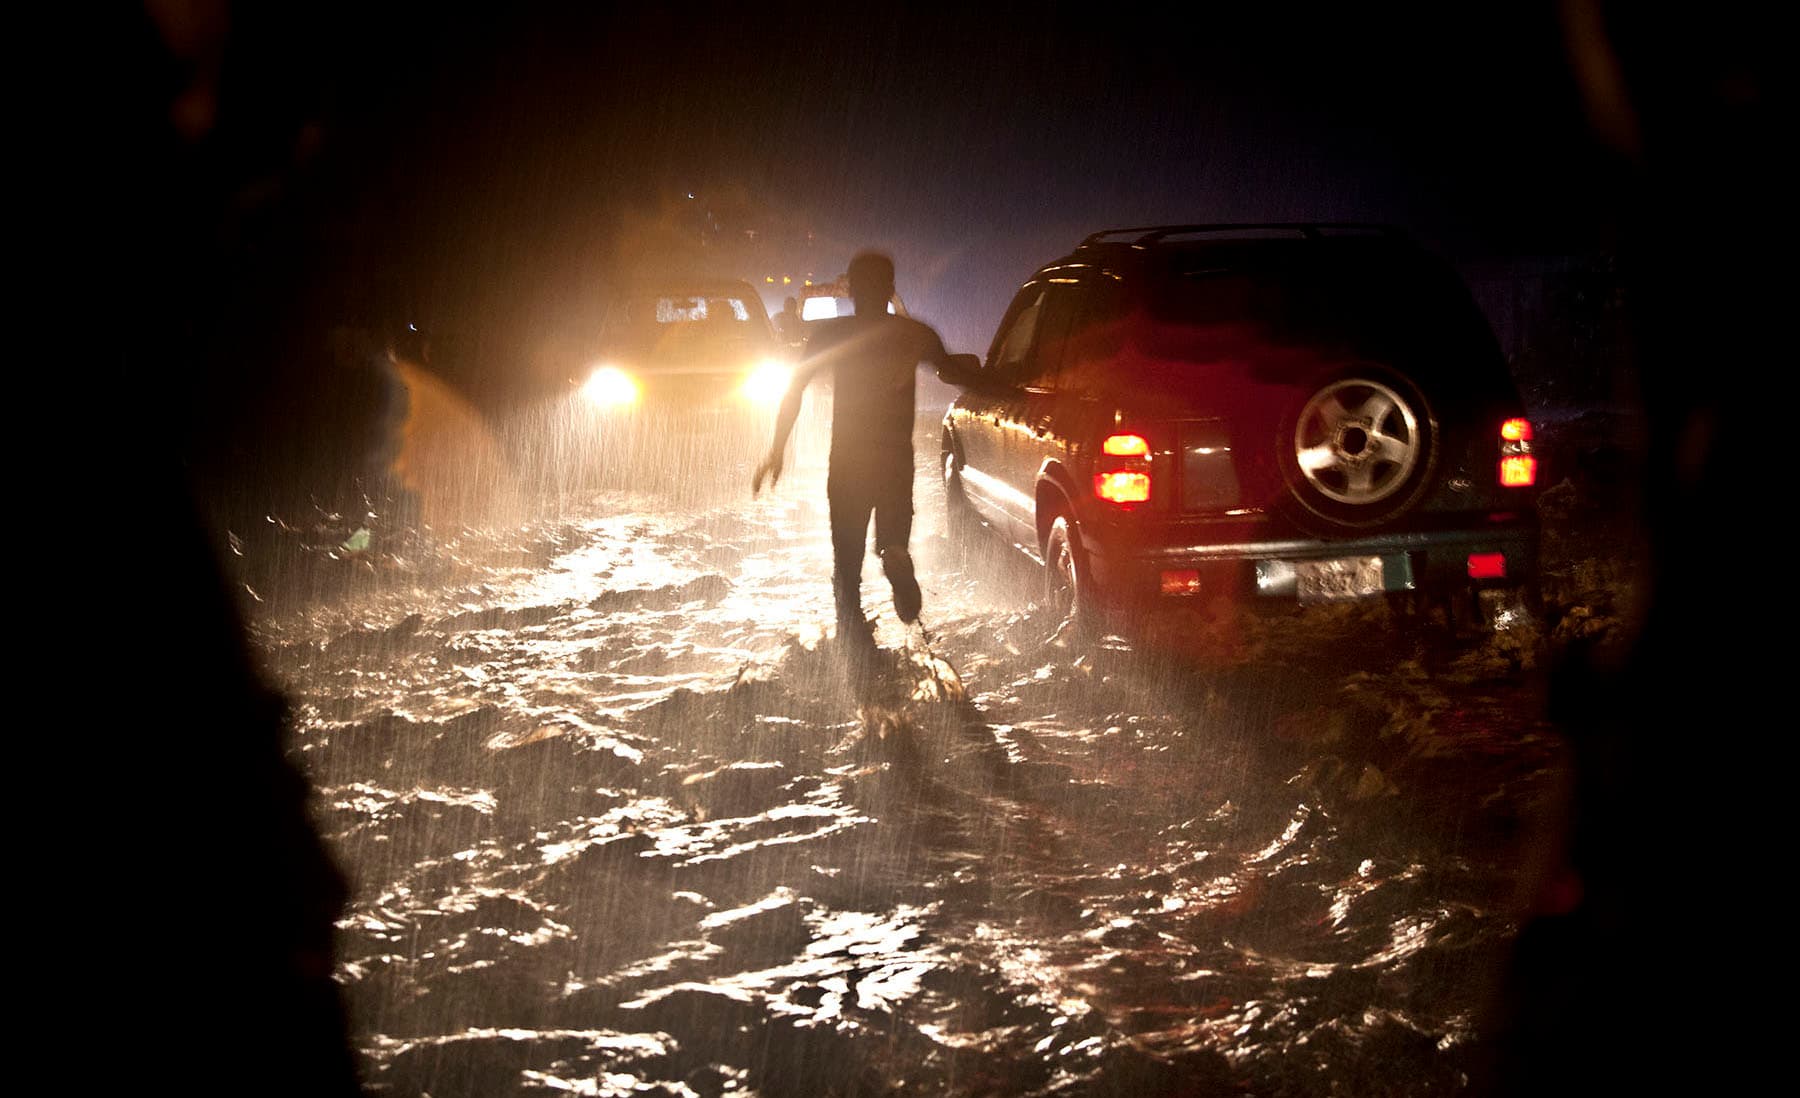 A man running through a street flooded with water